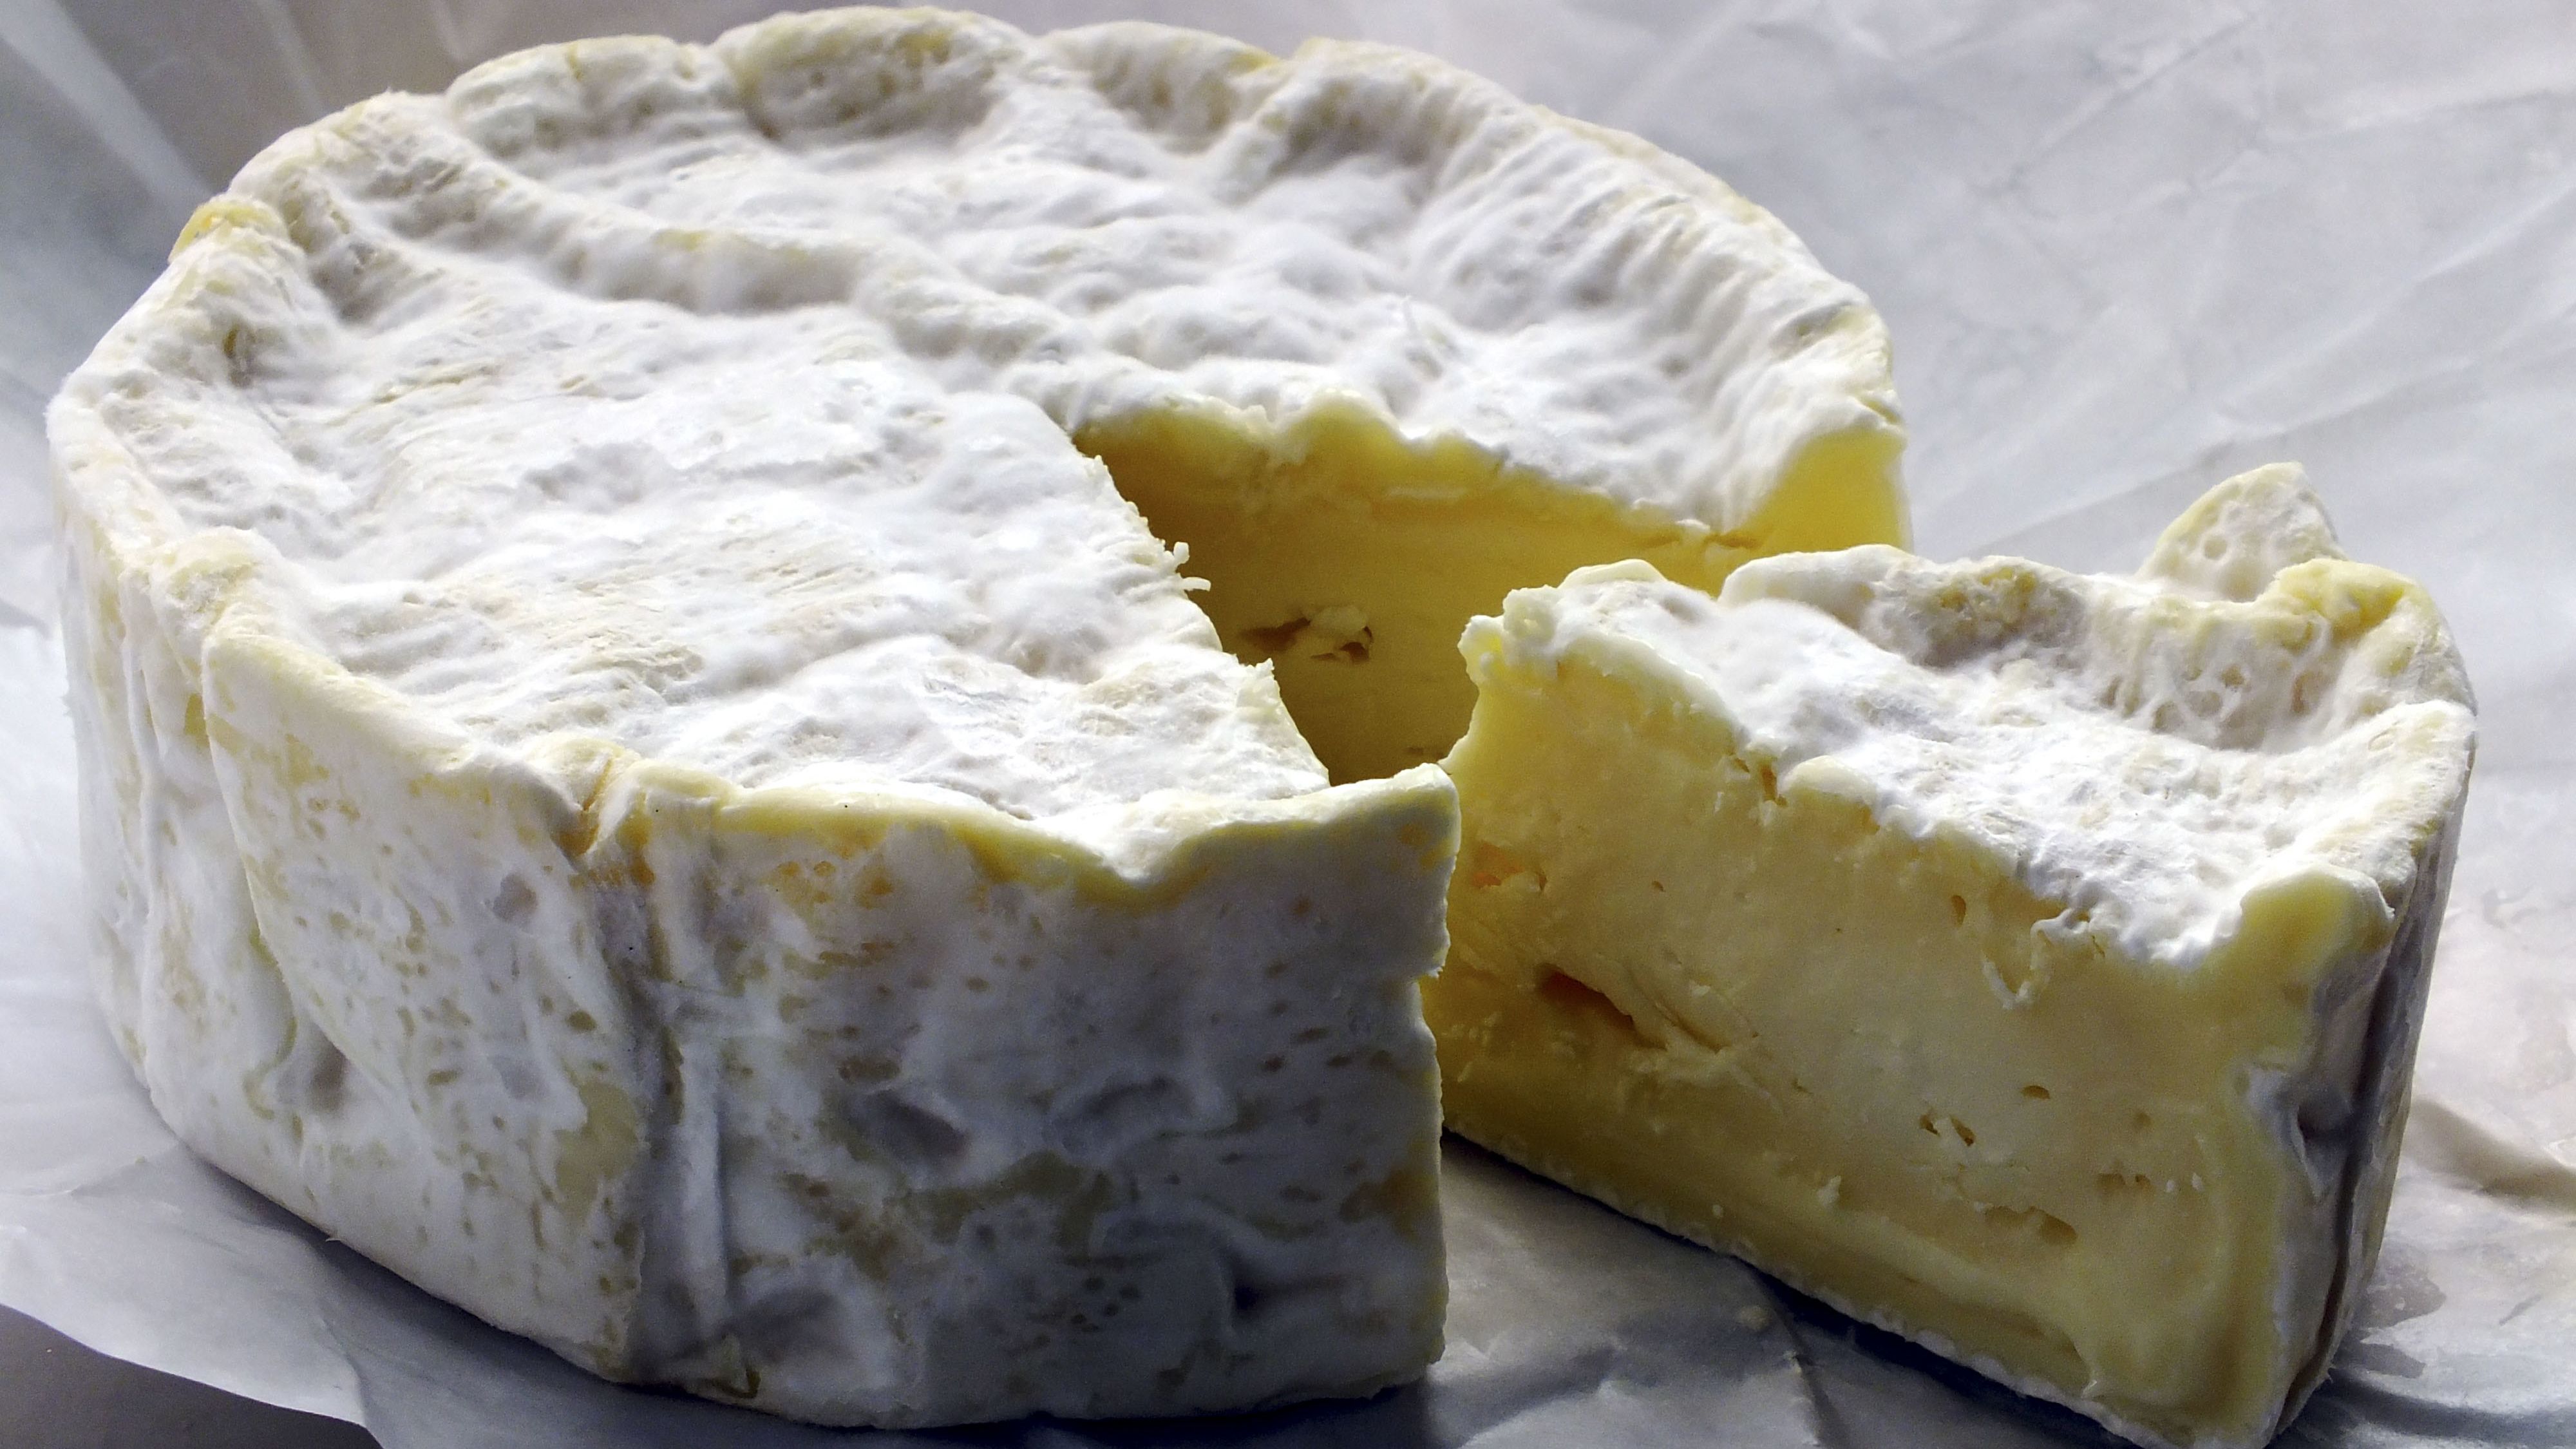 Camembert's distinctive white rind is created by a fungus that scientists say is in increasingly short supply.